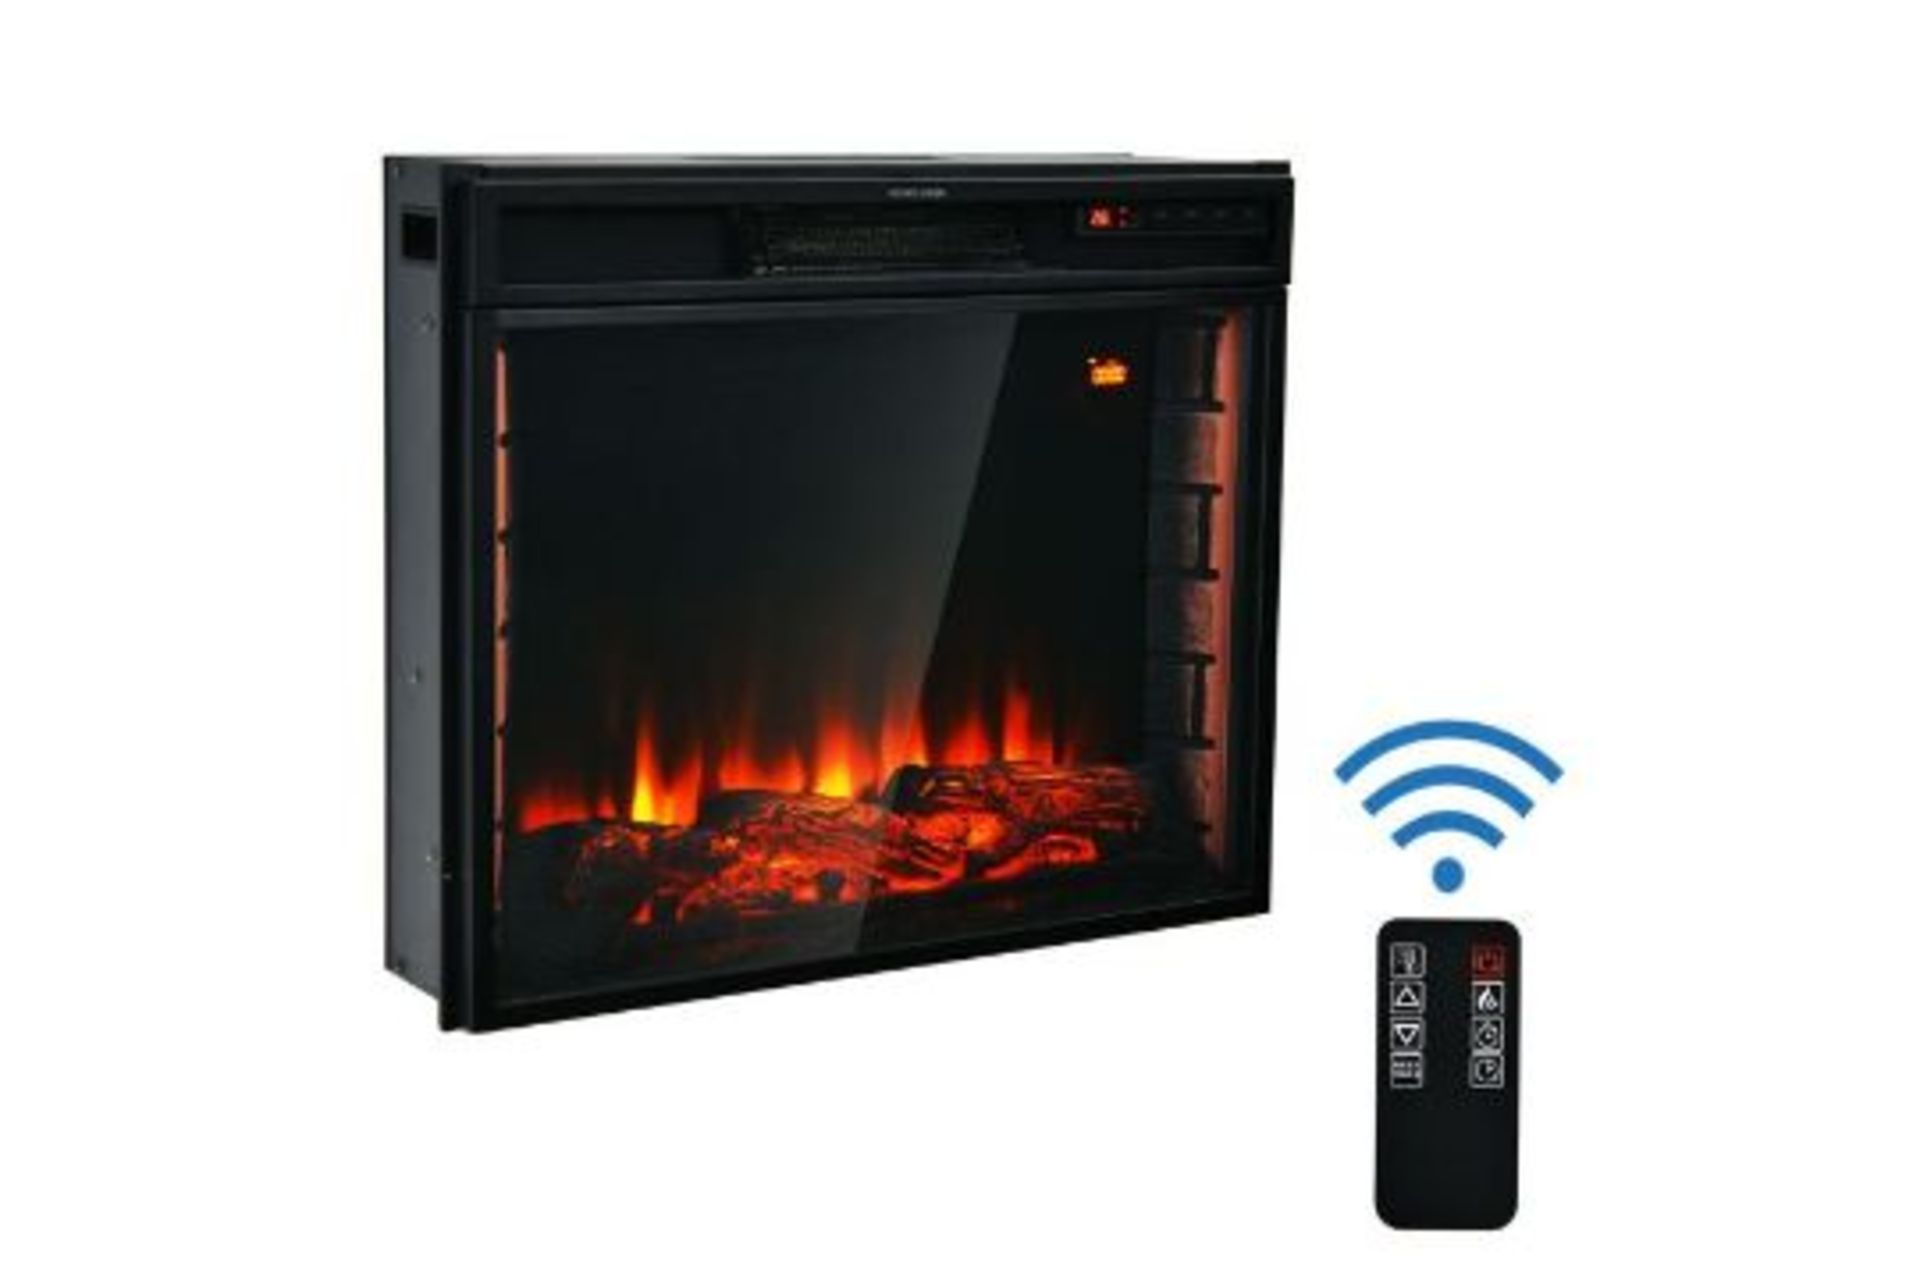 New & Boxed Marsily Marlow Home Co. 60cm Electric Fireplace. RRP £299. Complete the coziness of your - Image 10 of 10